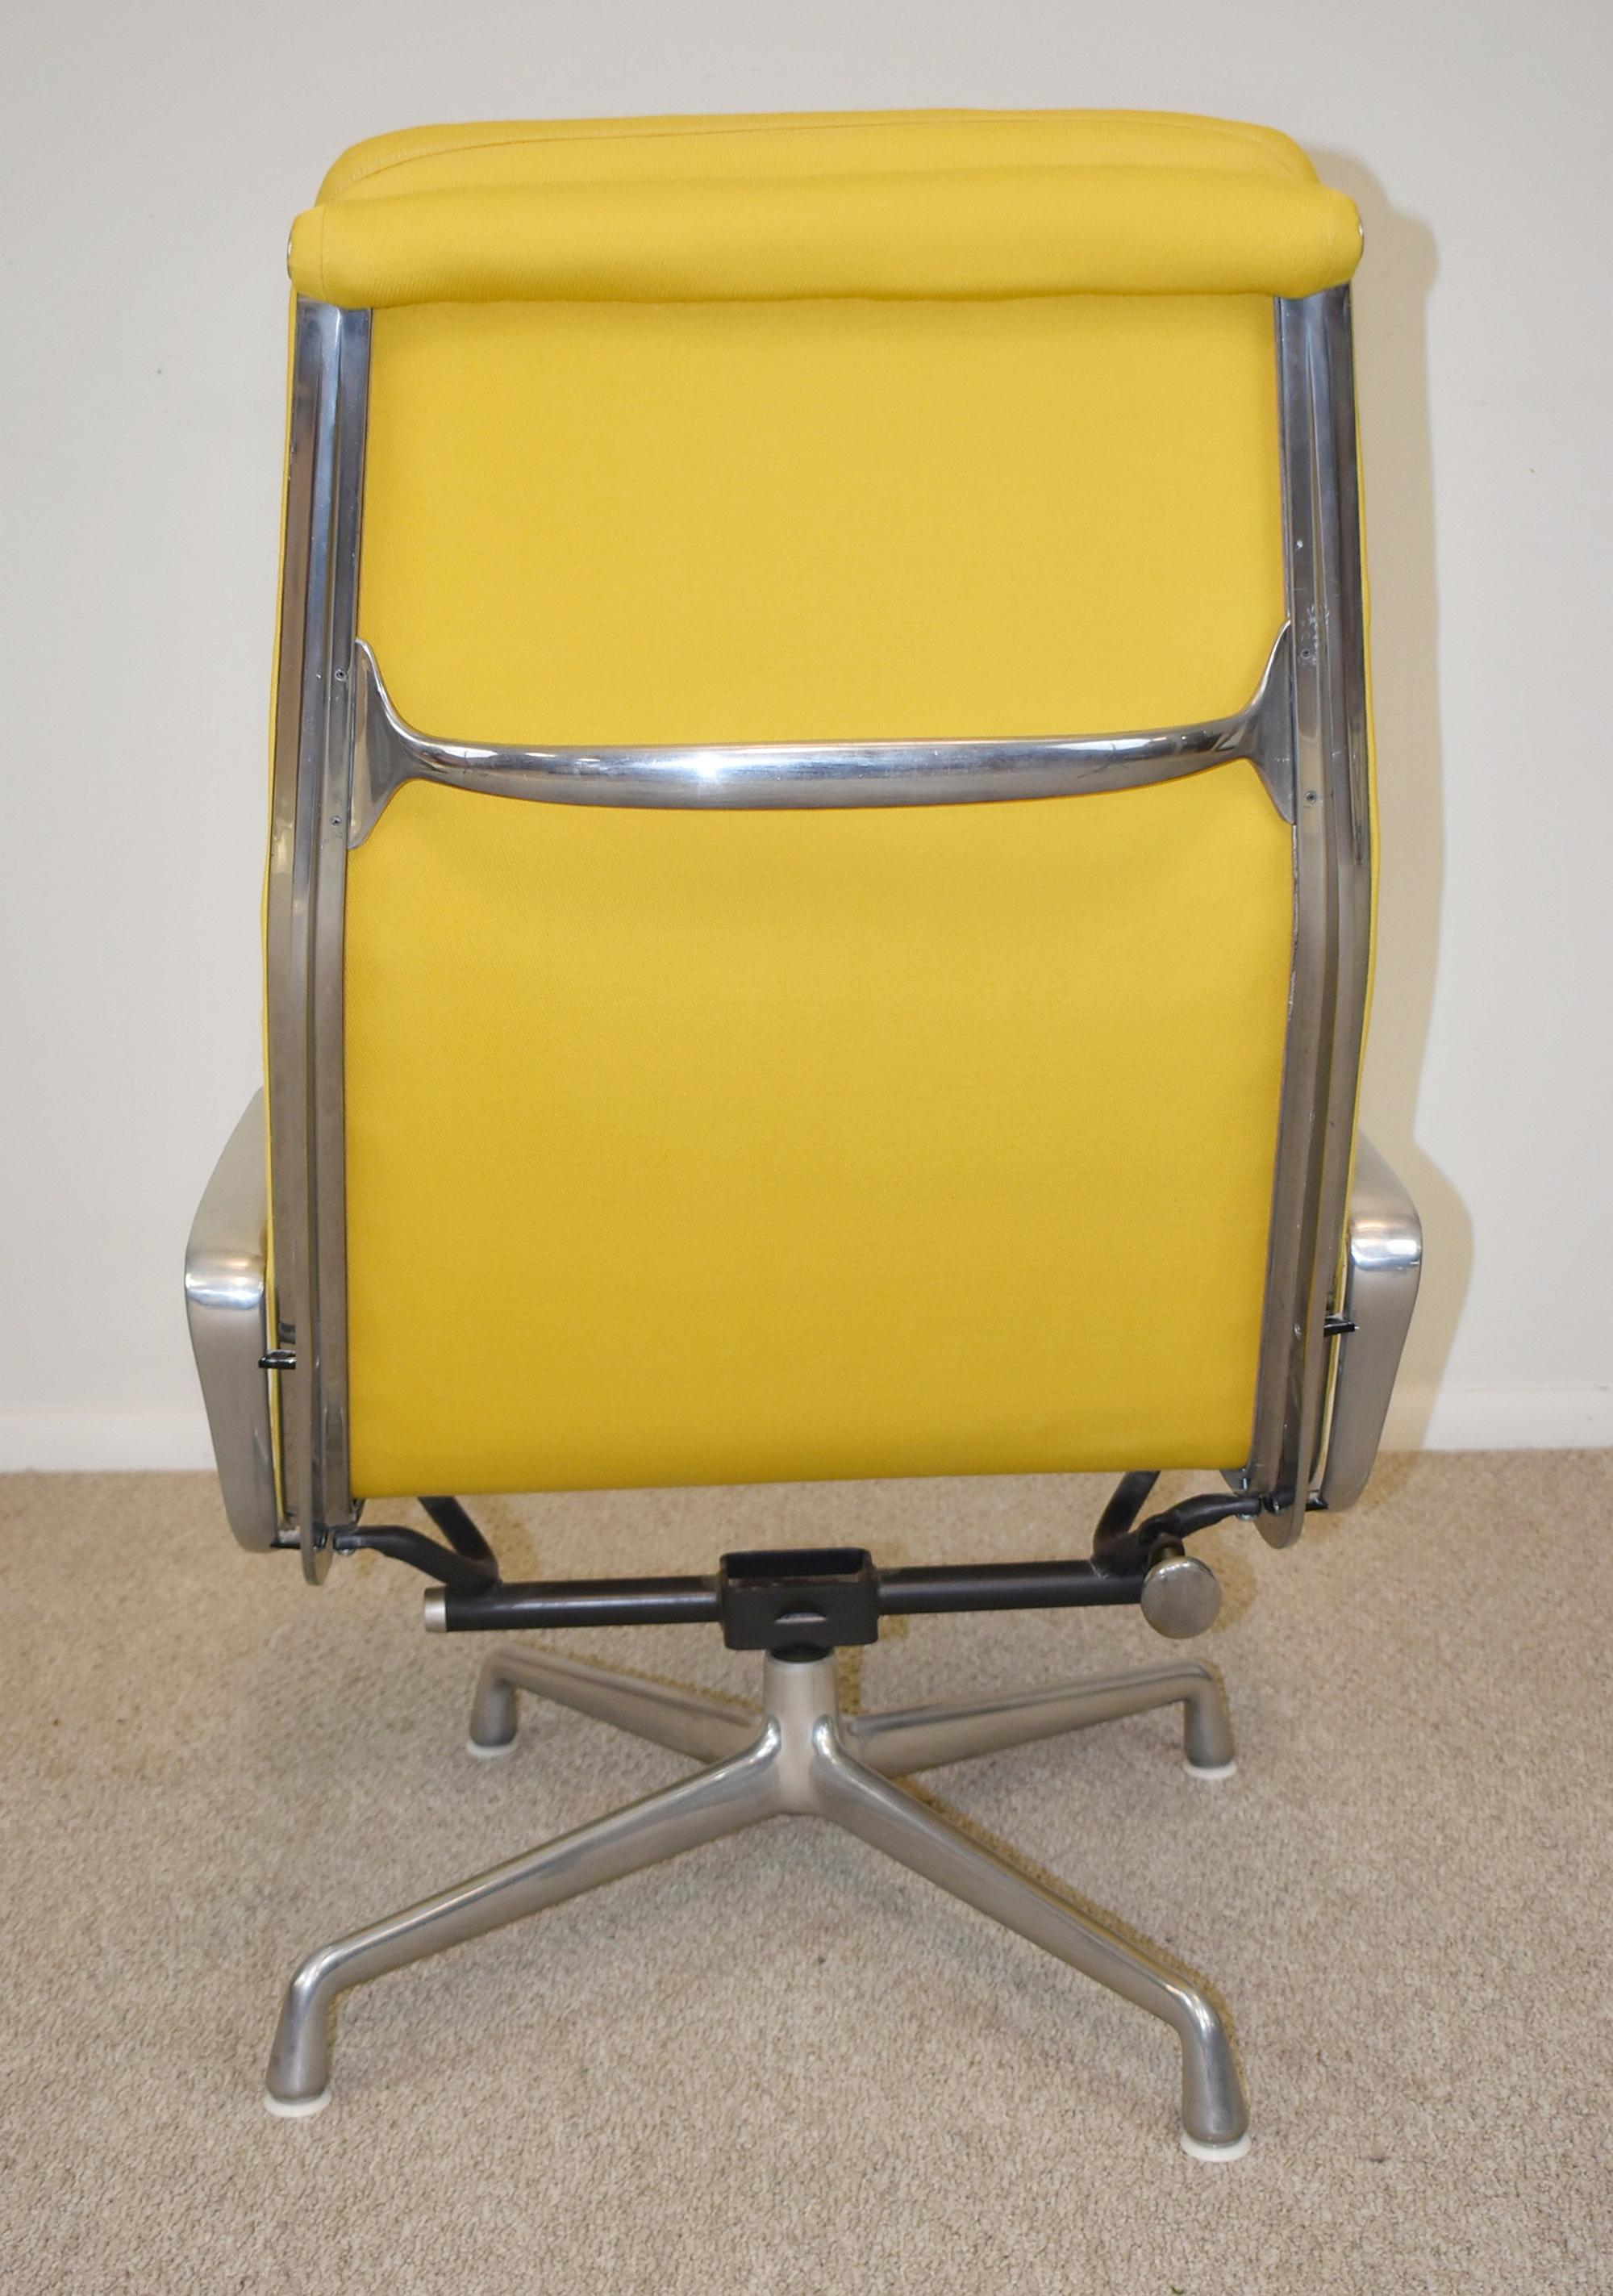 Aluminum Eames Soft Pad Chair, Executive Height in Yellow for Herman Miller